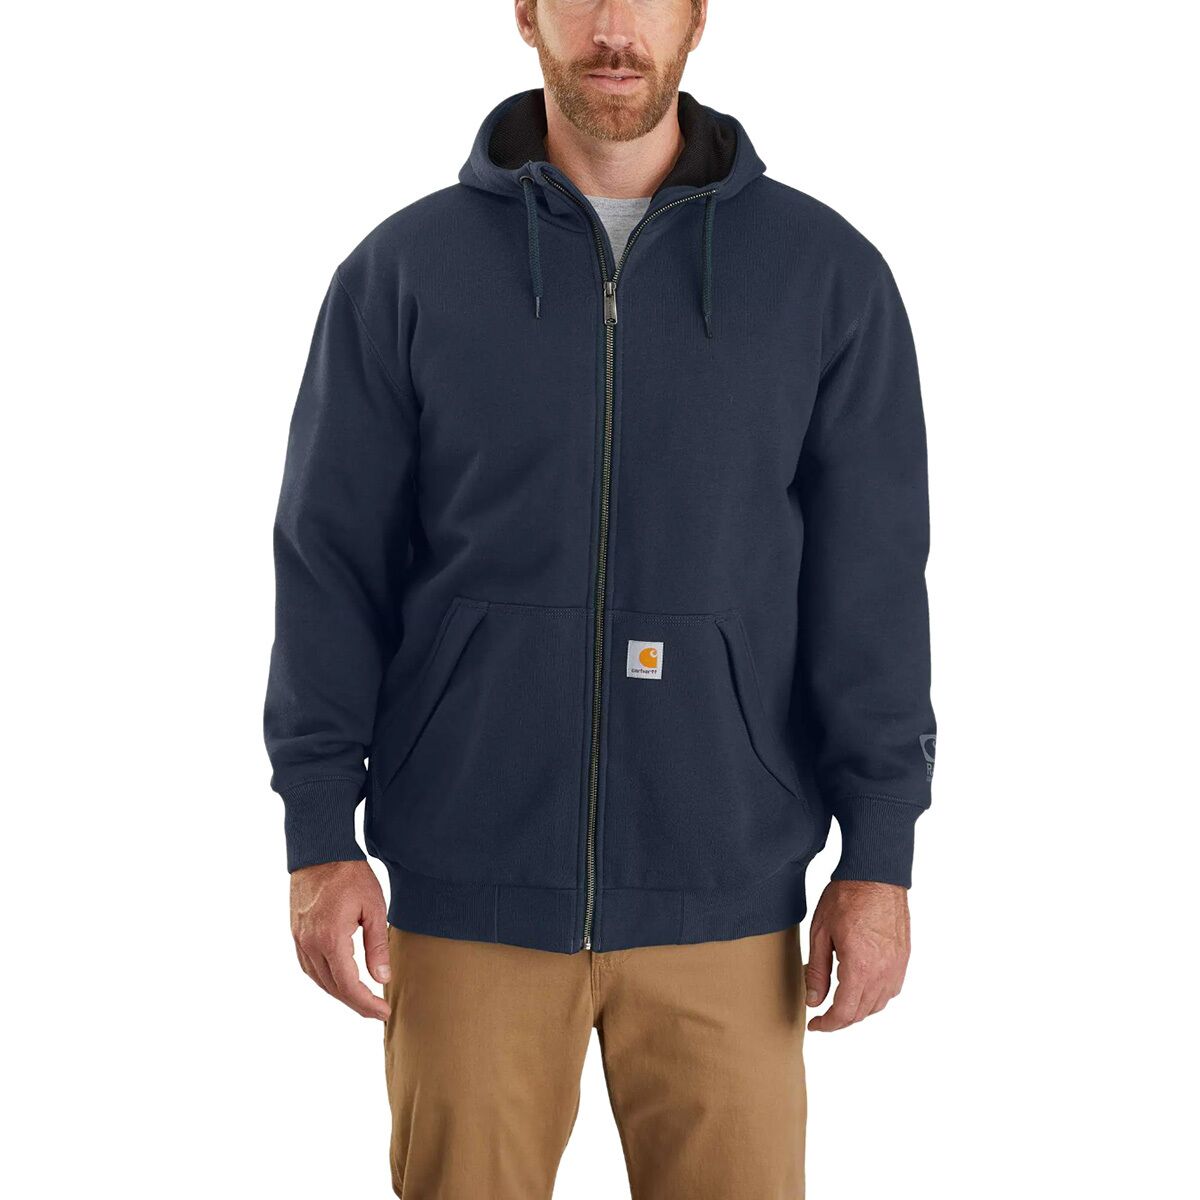 Carhartt RD Org Fit Midweight Thermal Lined Sweatshirt - Men's